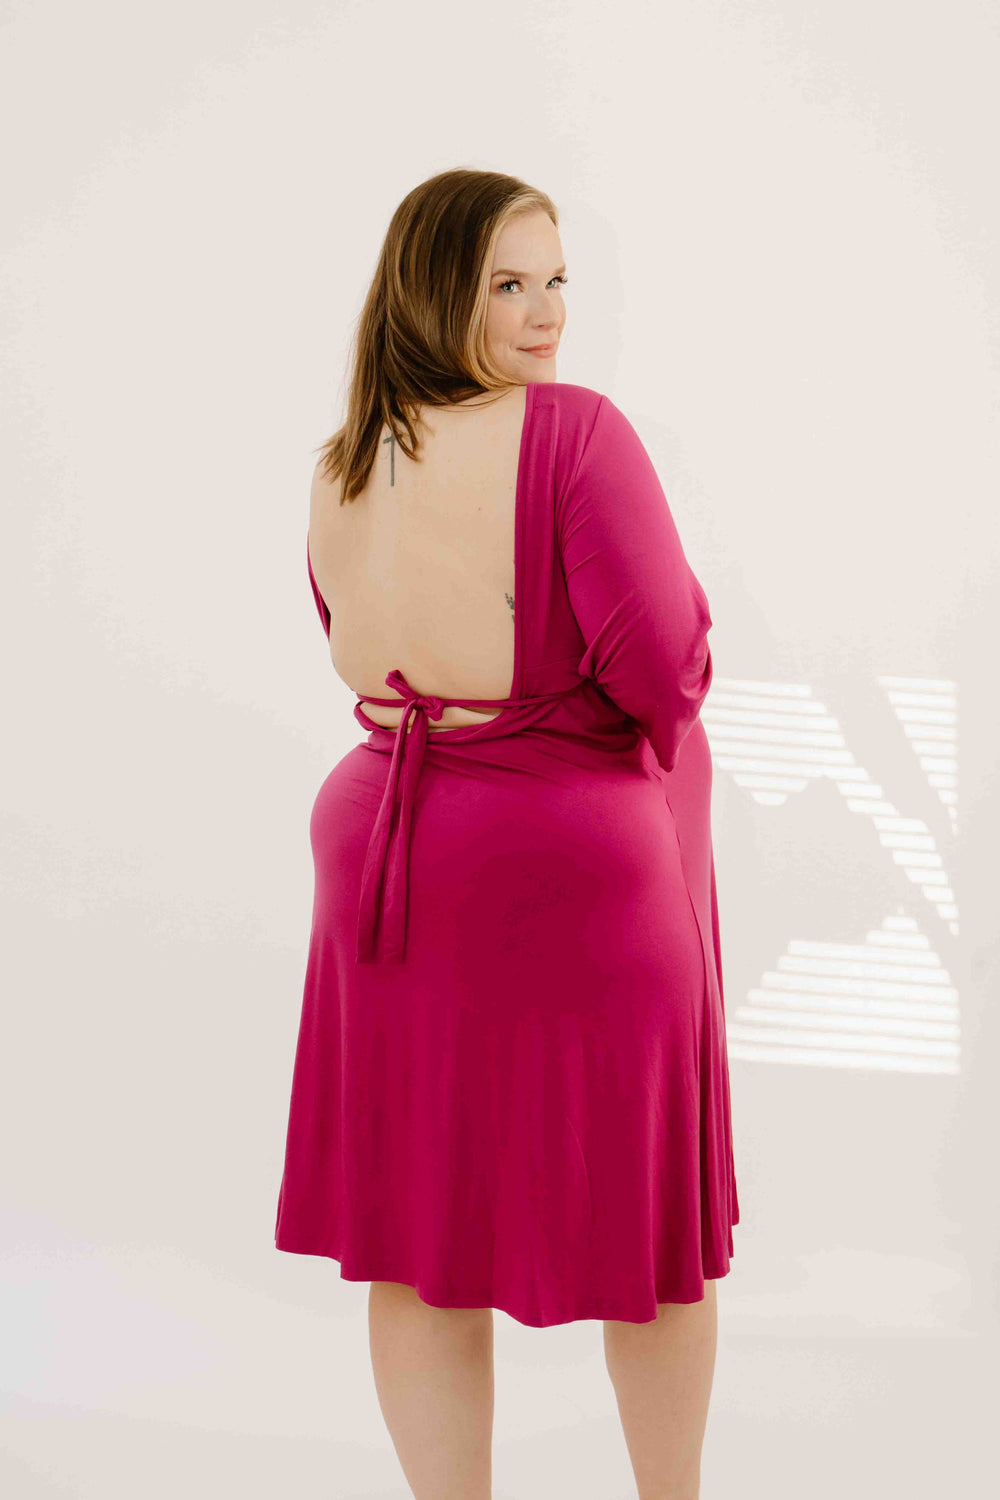 Lila Labor & Postpartum Gown in Raspberry Red